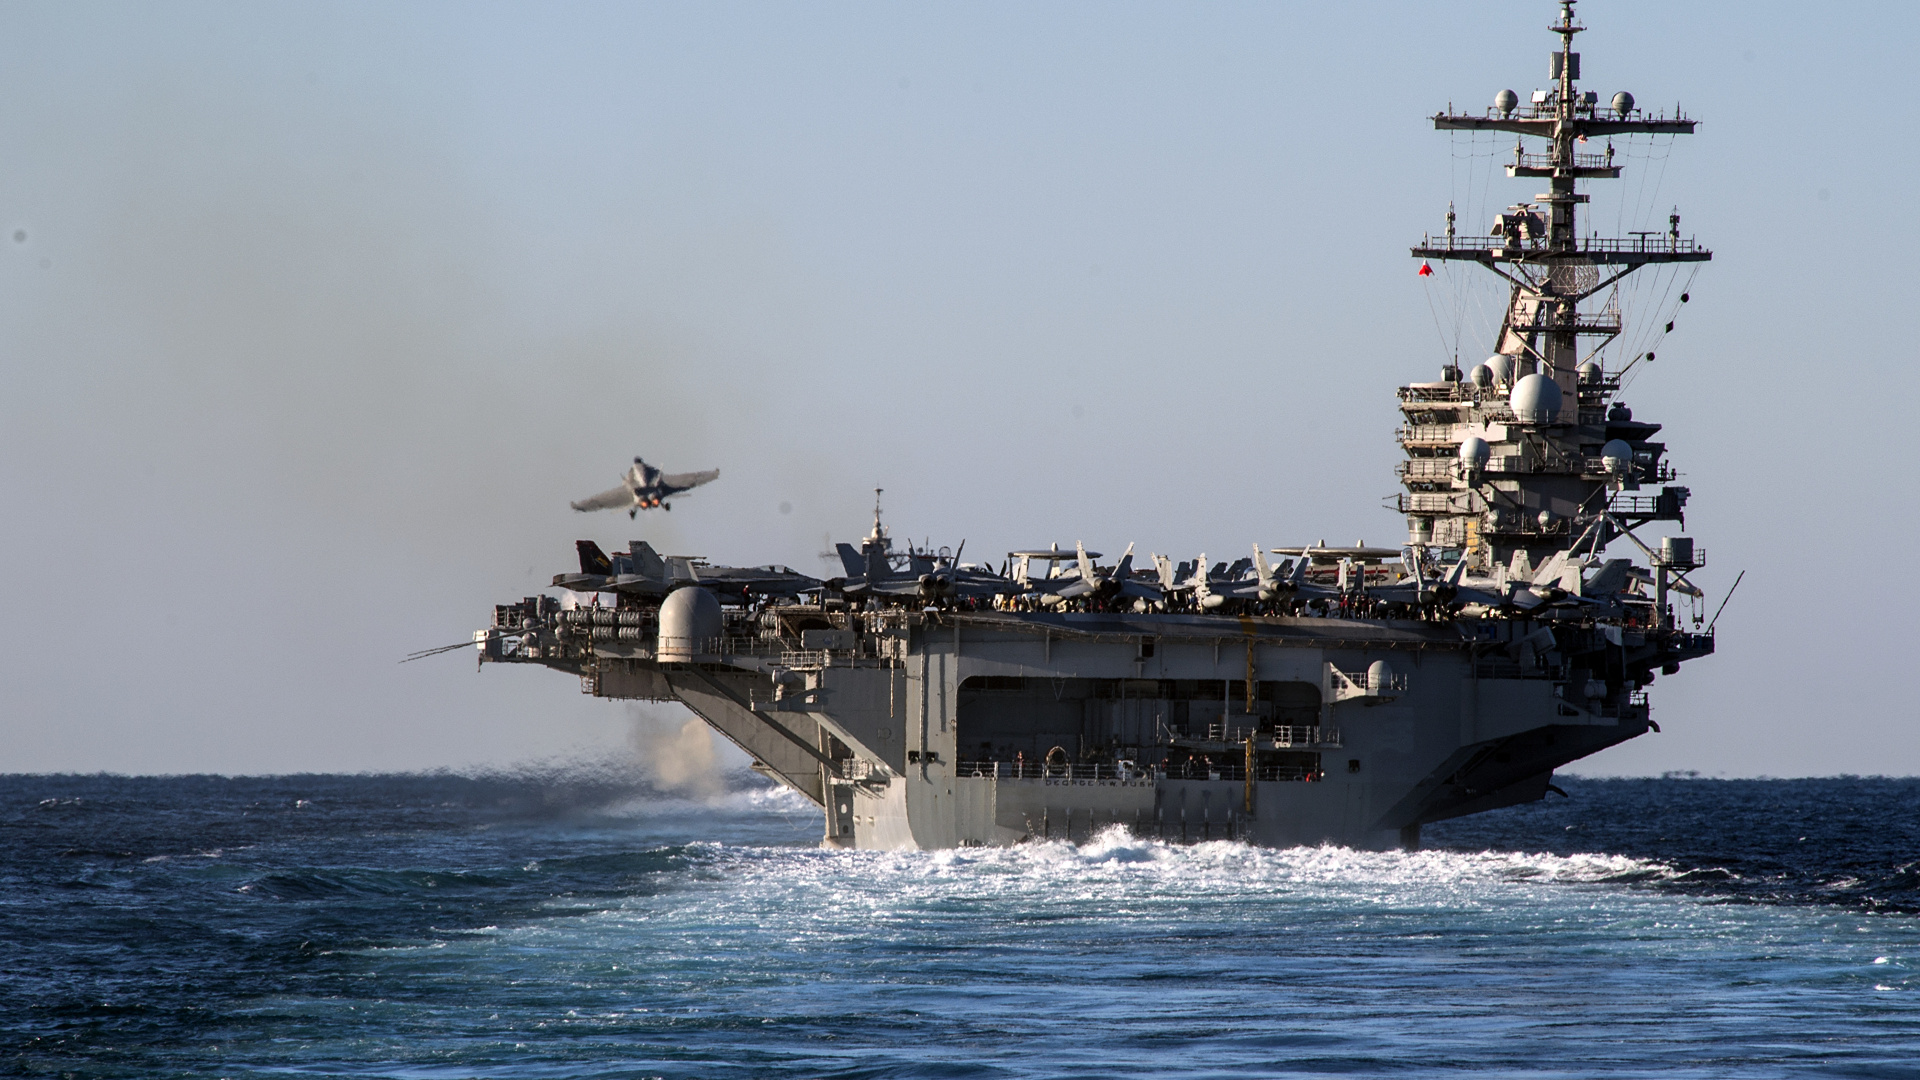 Aircraft Carrier, United States Navy, USS George H W Bush, Ship, Carrier Strike Group. Wallpaper in 1920x1080 Resolution